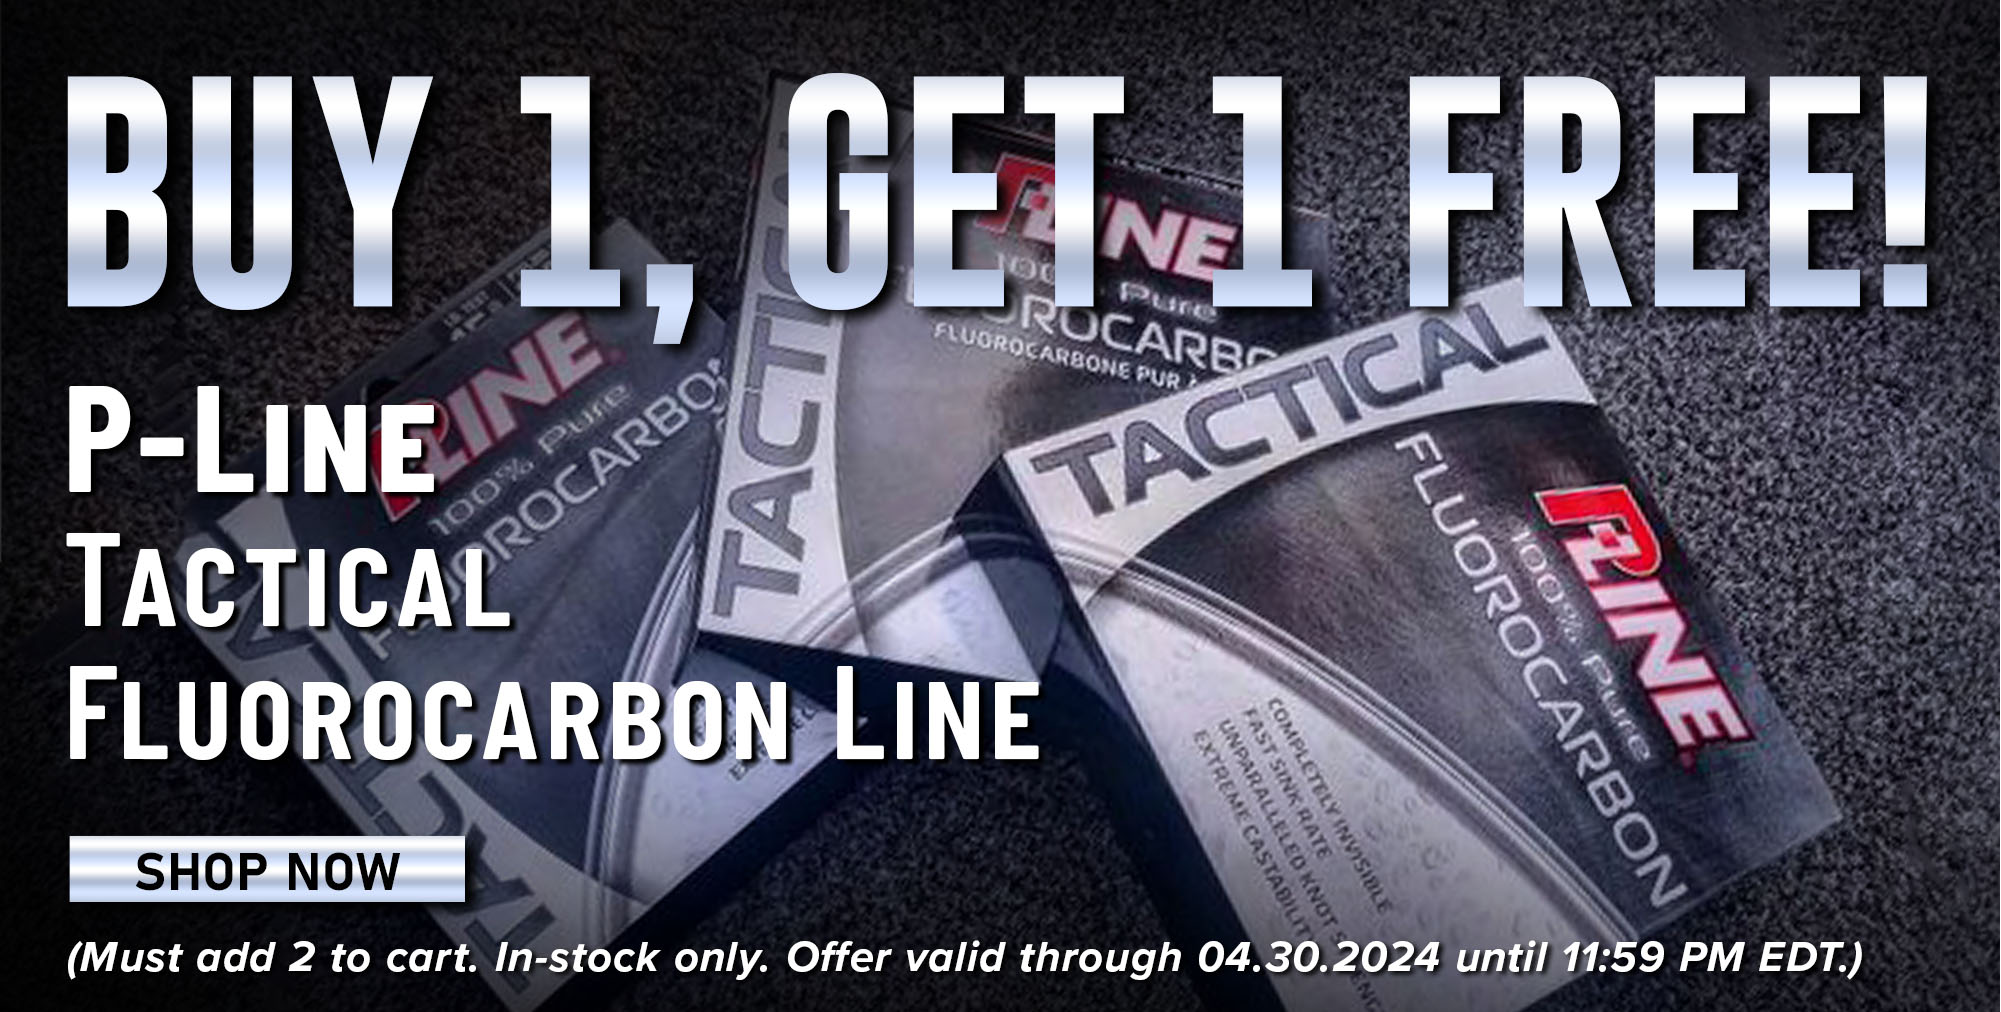 Buy 1, Get 1 Free! P-Line Tactical Fluorocarbon Line Shop Now (Must add 2 to cart. In-stock only. Offer valid through 04.30.2024 until 11:59 PM EDT.)